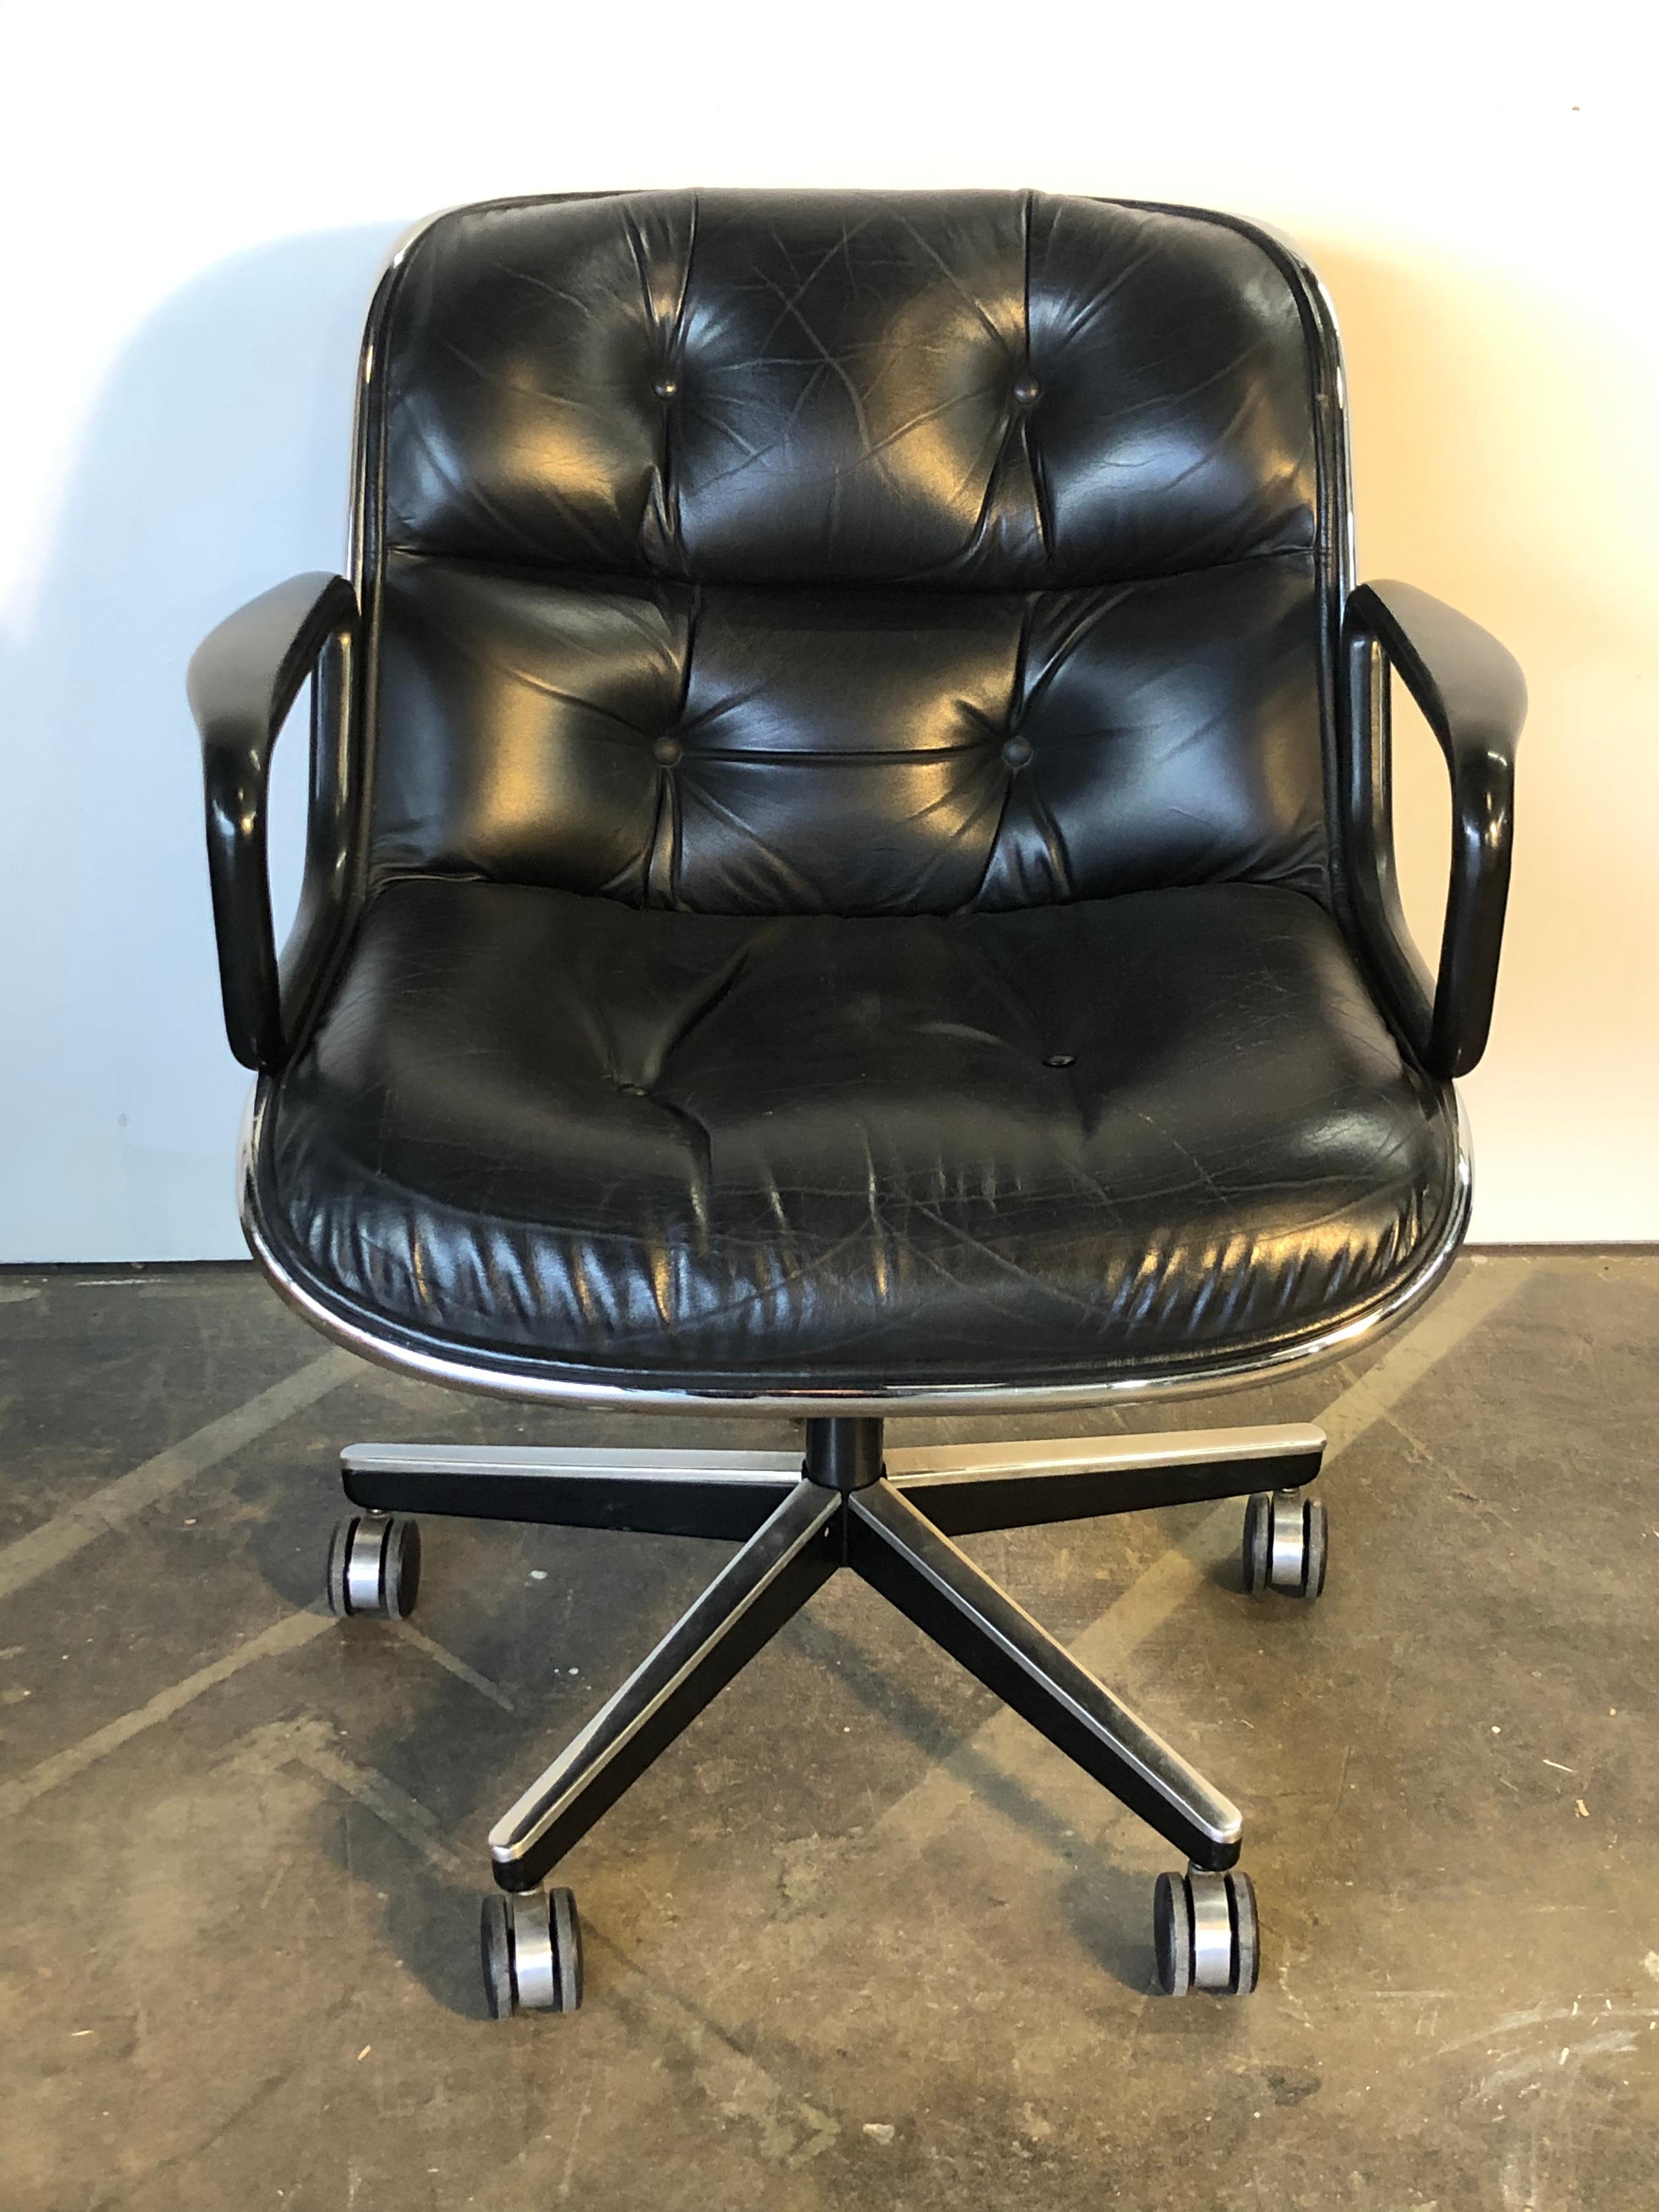 Wonderful edition of the iconic American office chair. Charles Pollock designed this uber comfortable office chair for Knoll. Retains original manufacturer label. Finished in black leather with no tears and all buttons intact. In very good